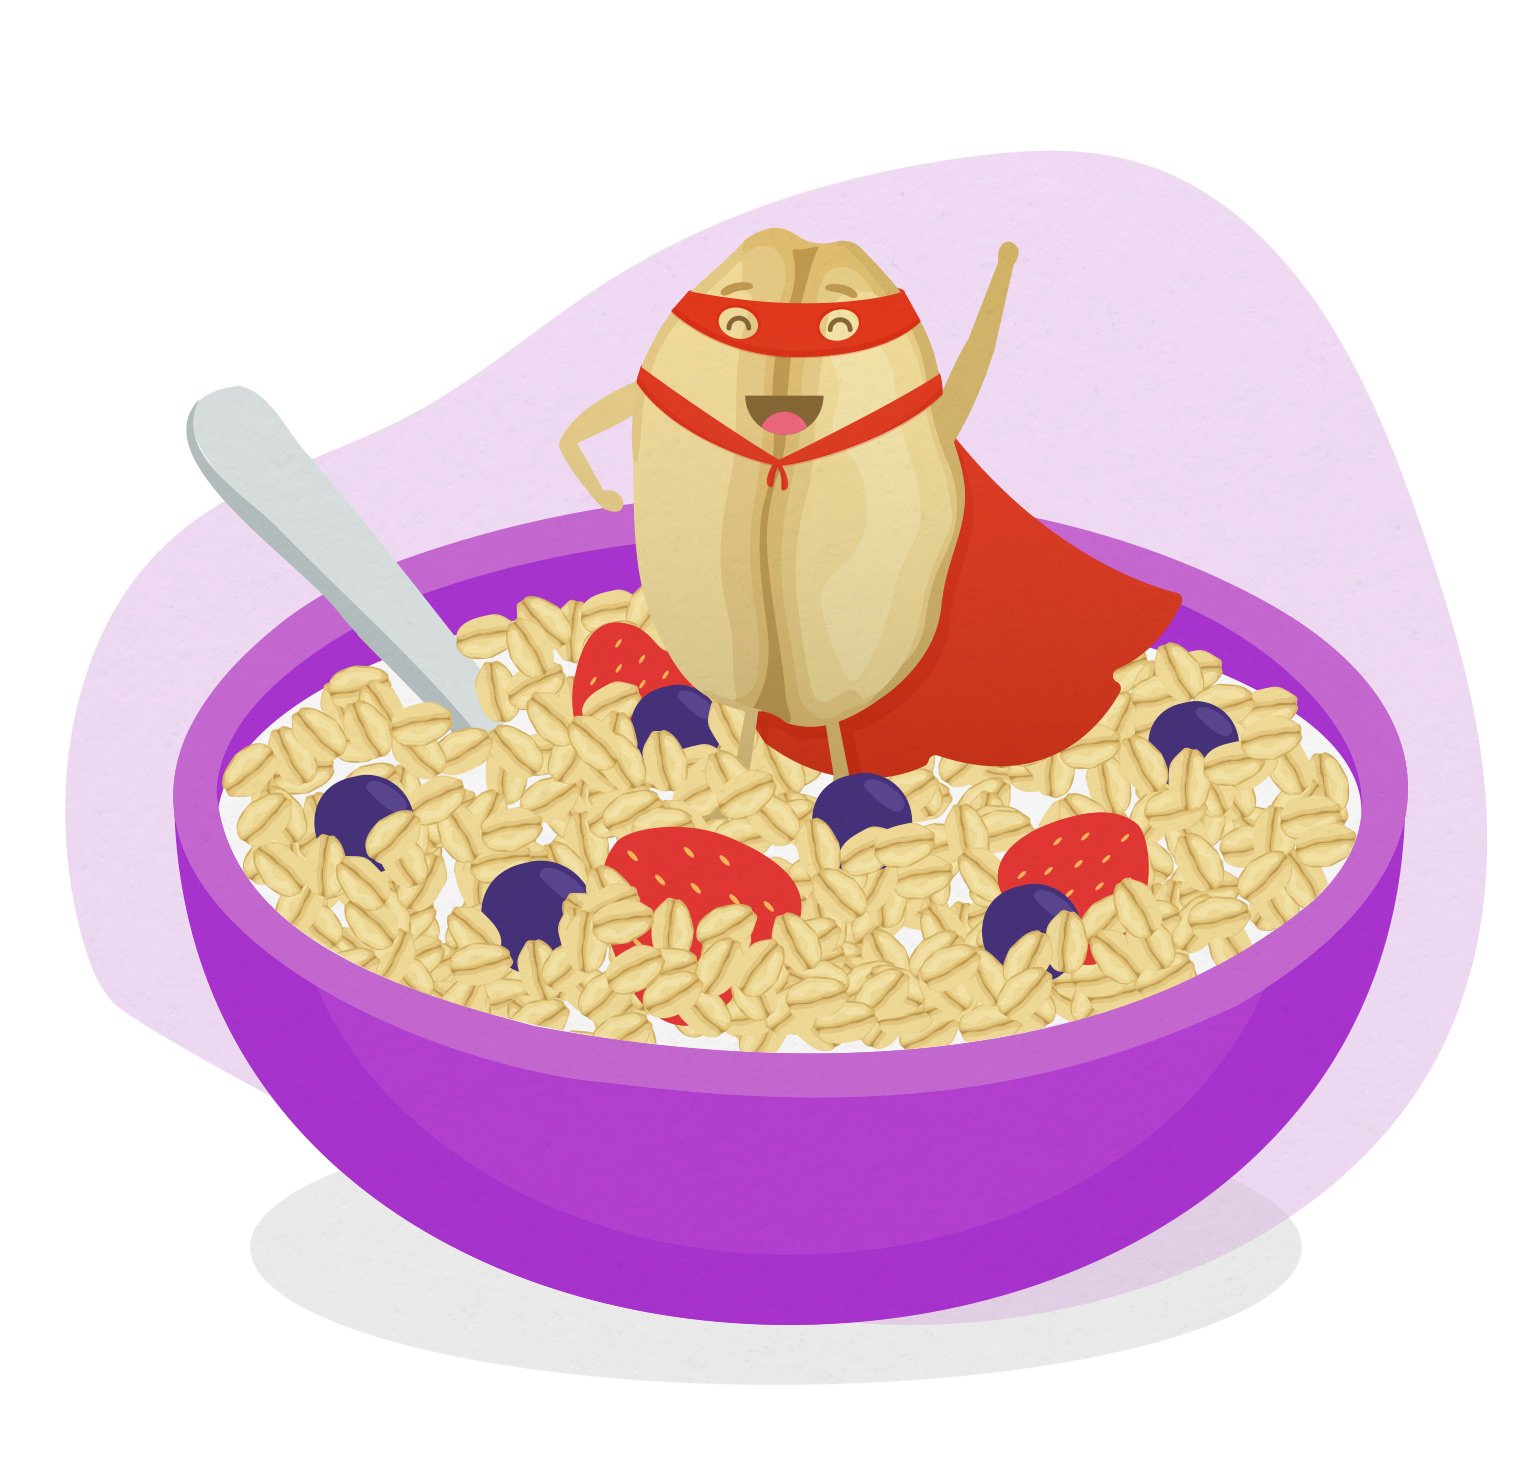 Illustration of a bowl of porridge with an oat flake wearing a superhero suit.